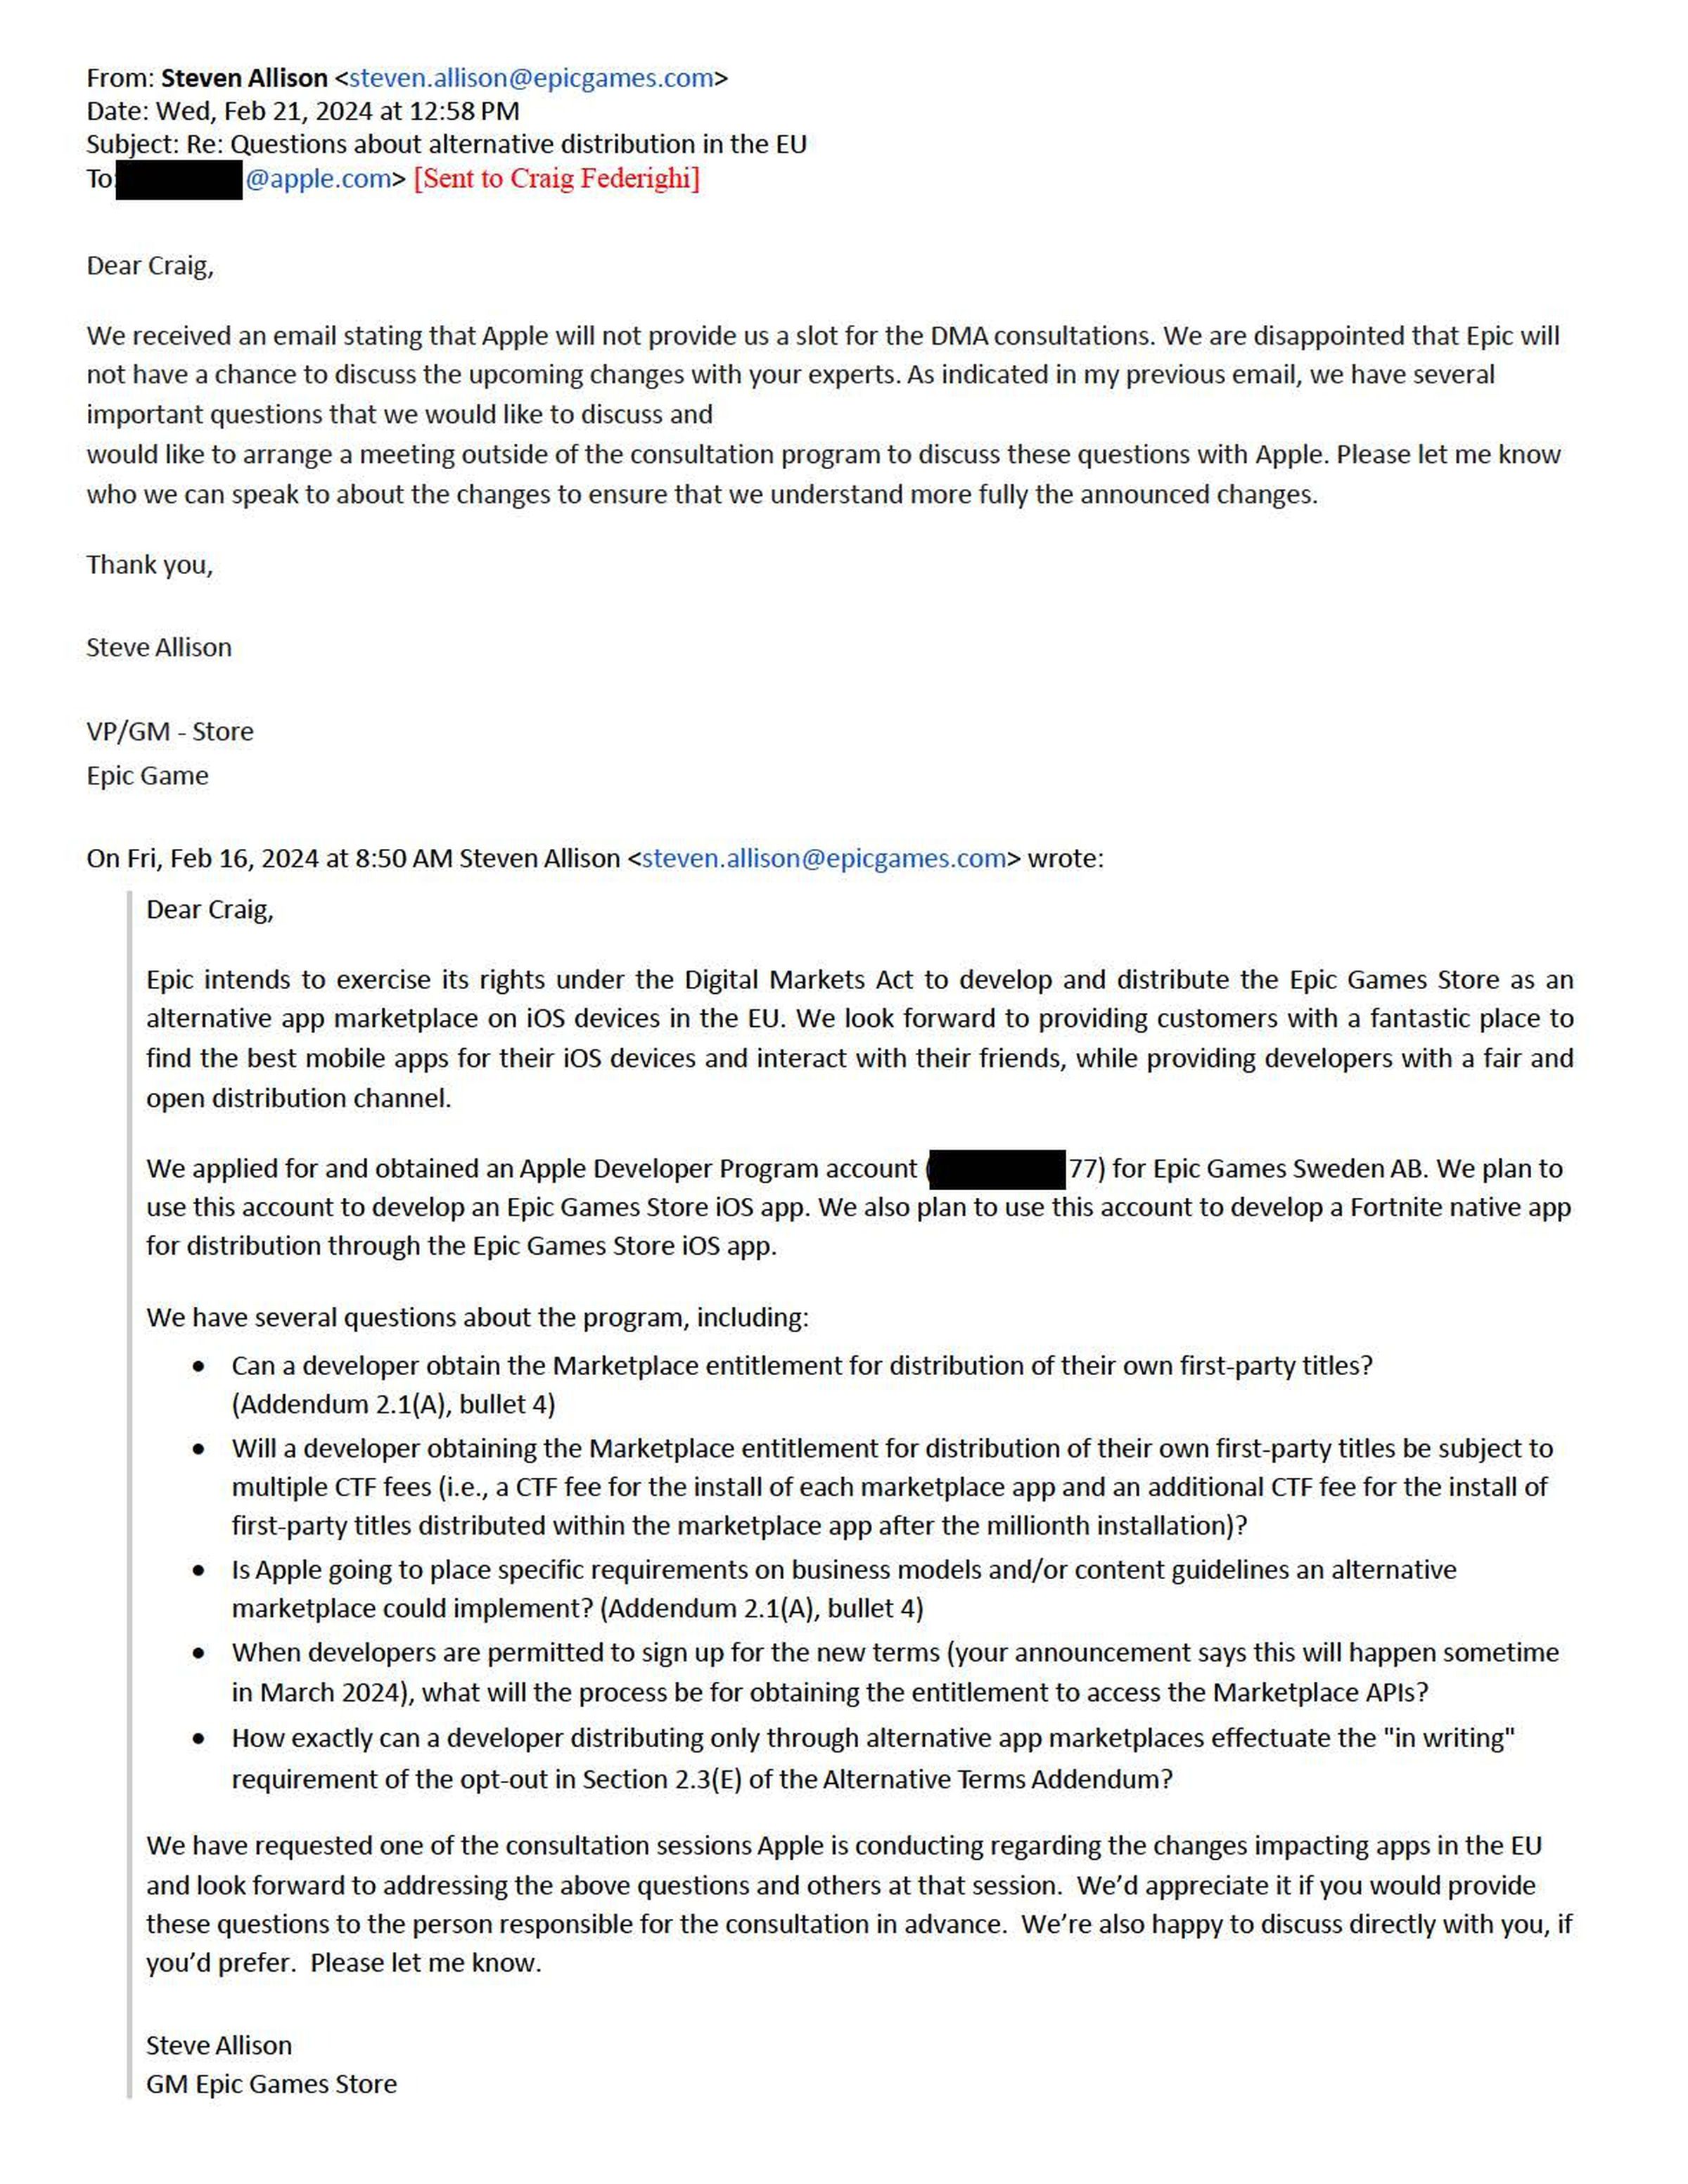 An email sent from Epic’s Steve Allison to Apple’s Craig Federighi regarding its third-party app stores plans.